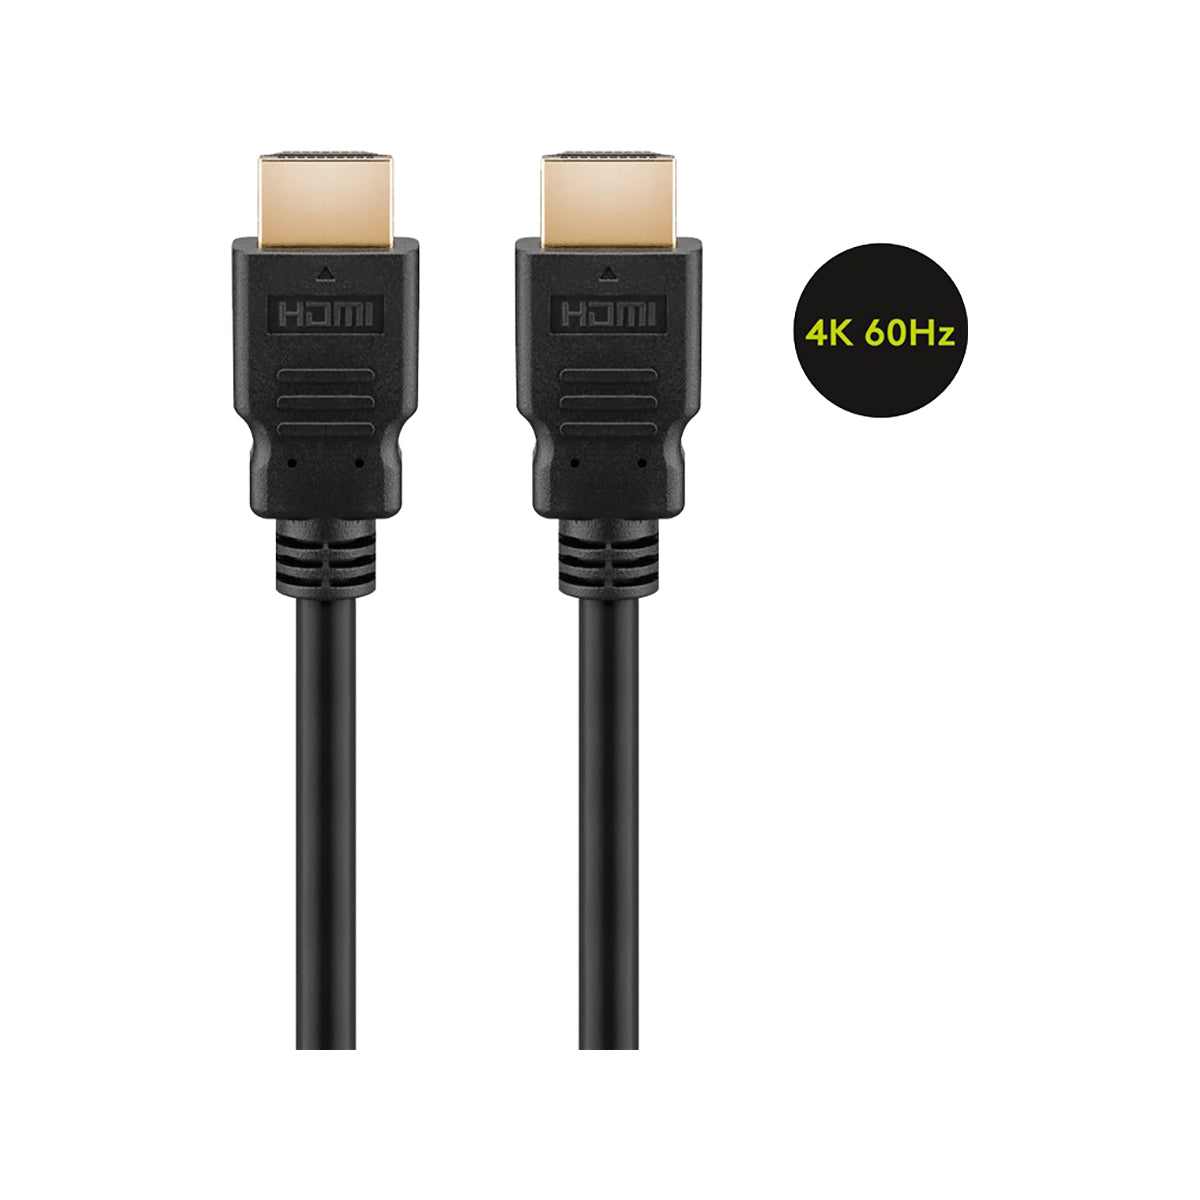 Goobay High Speed HDMI™ Cable with Ethernet (4K@60Hz) 1.5M for Laptops